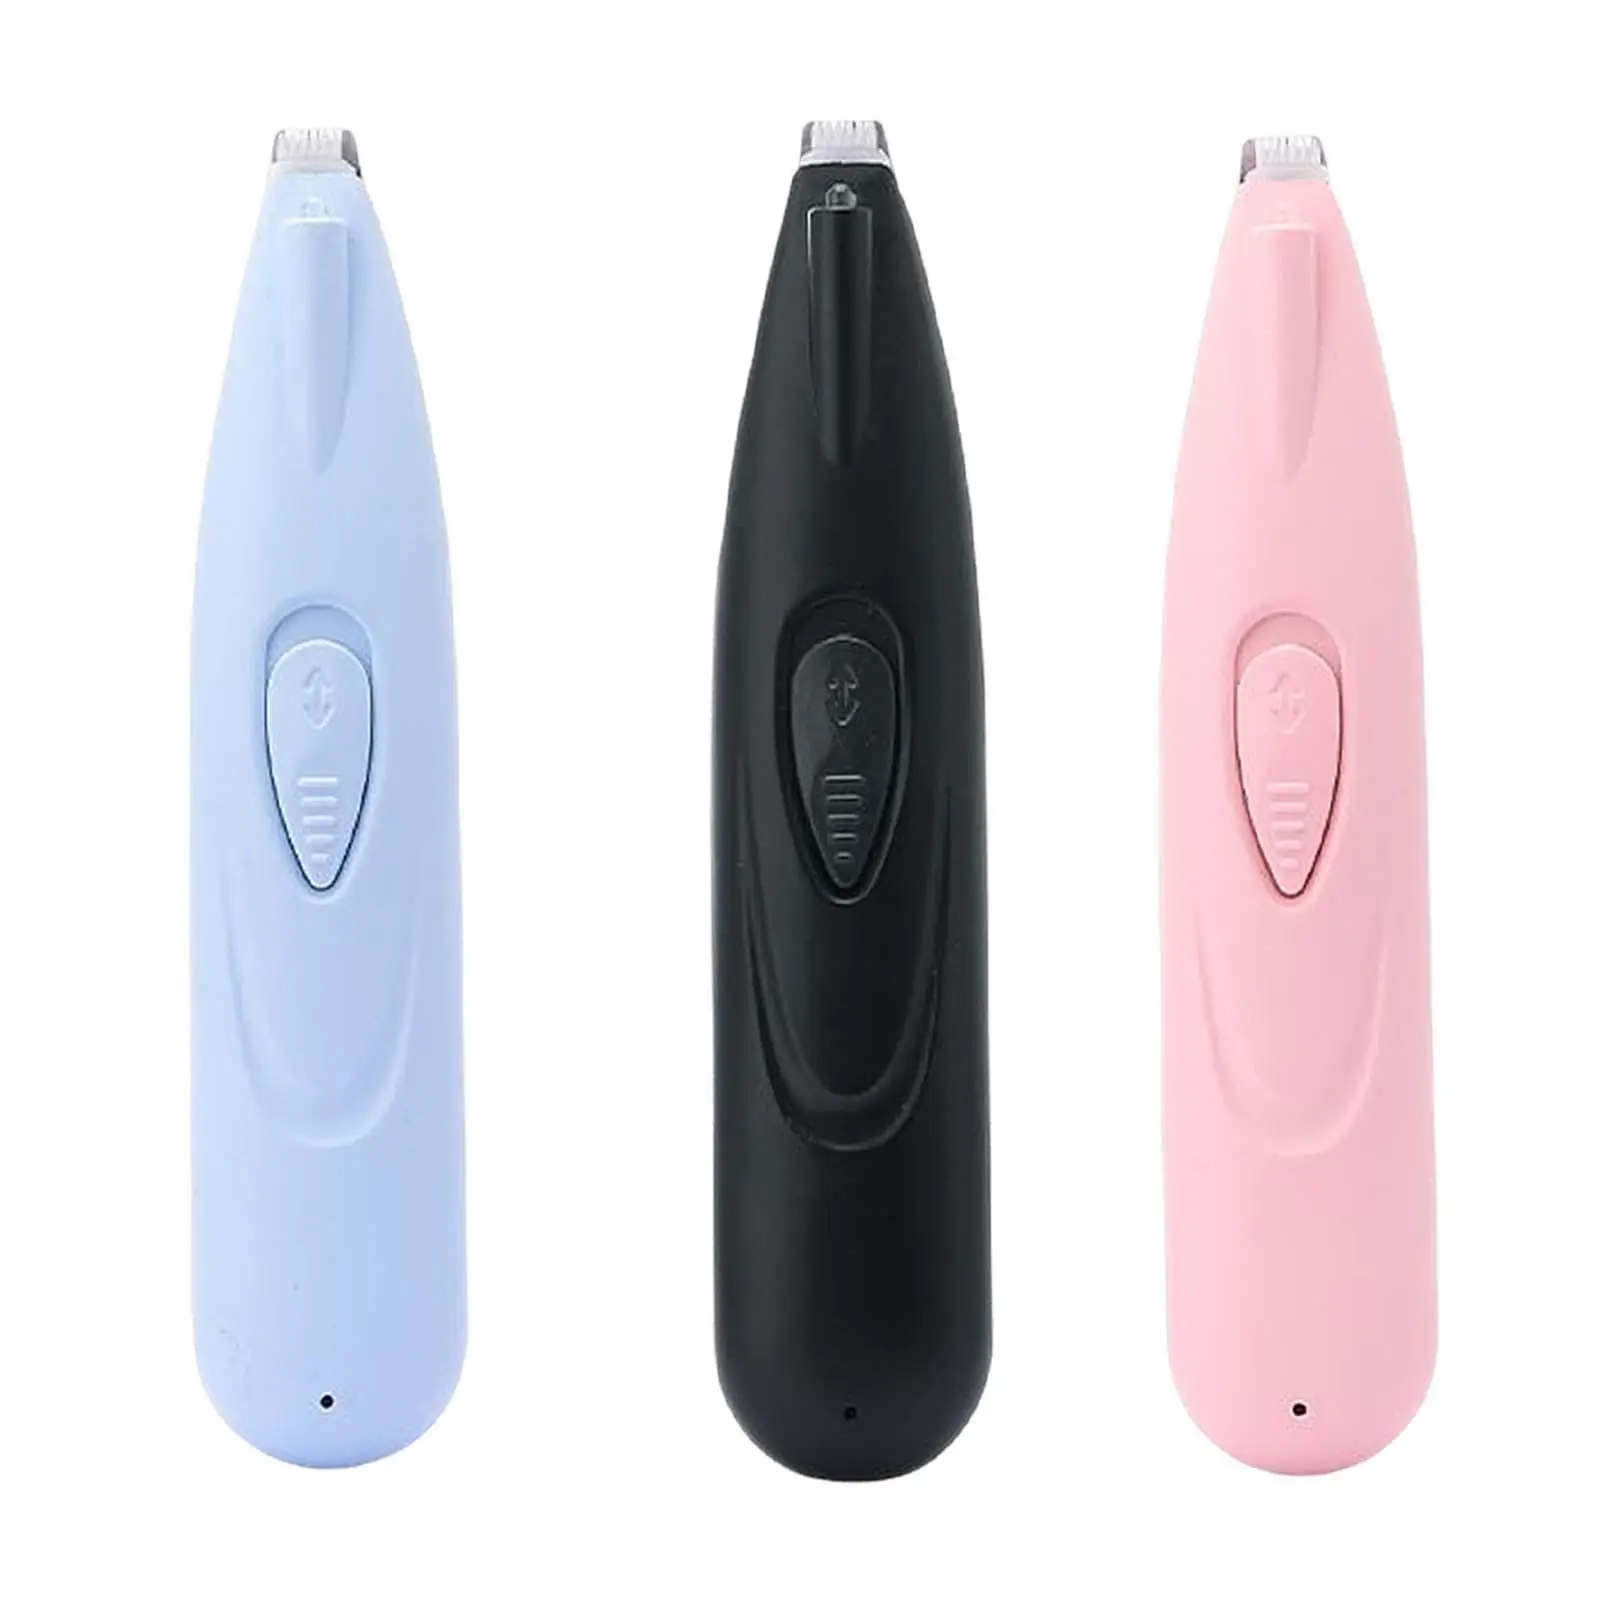 Portable Pet Nail Hair Trimmer Grinder Haircut Shearing Paw Low Noise Cutter